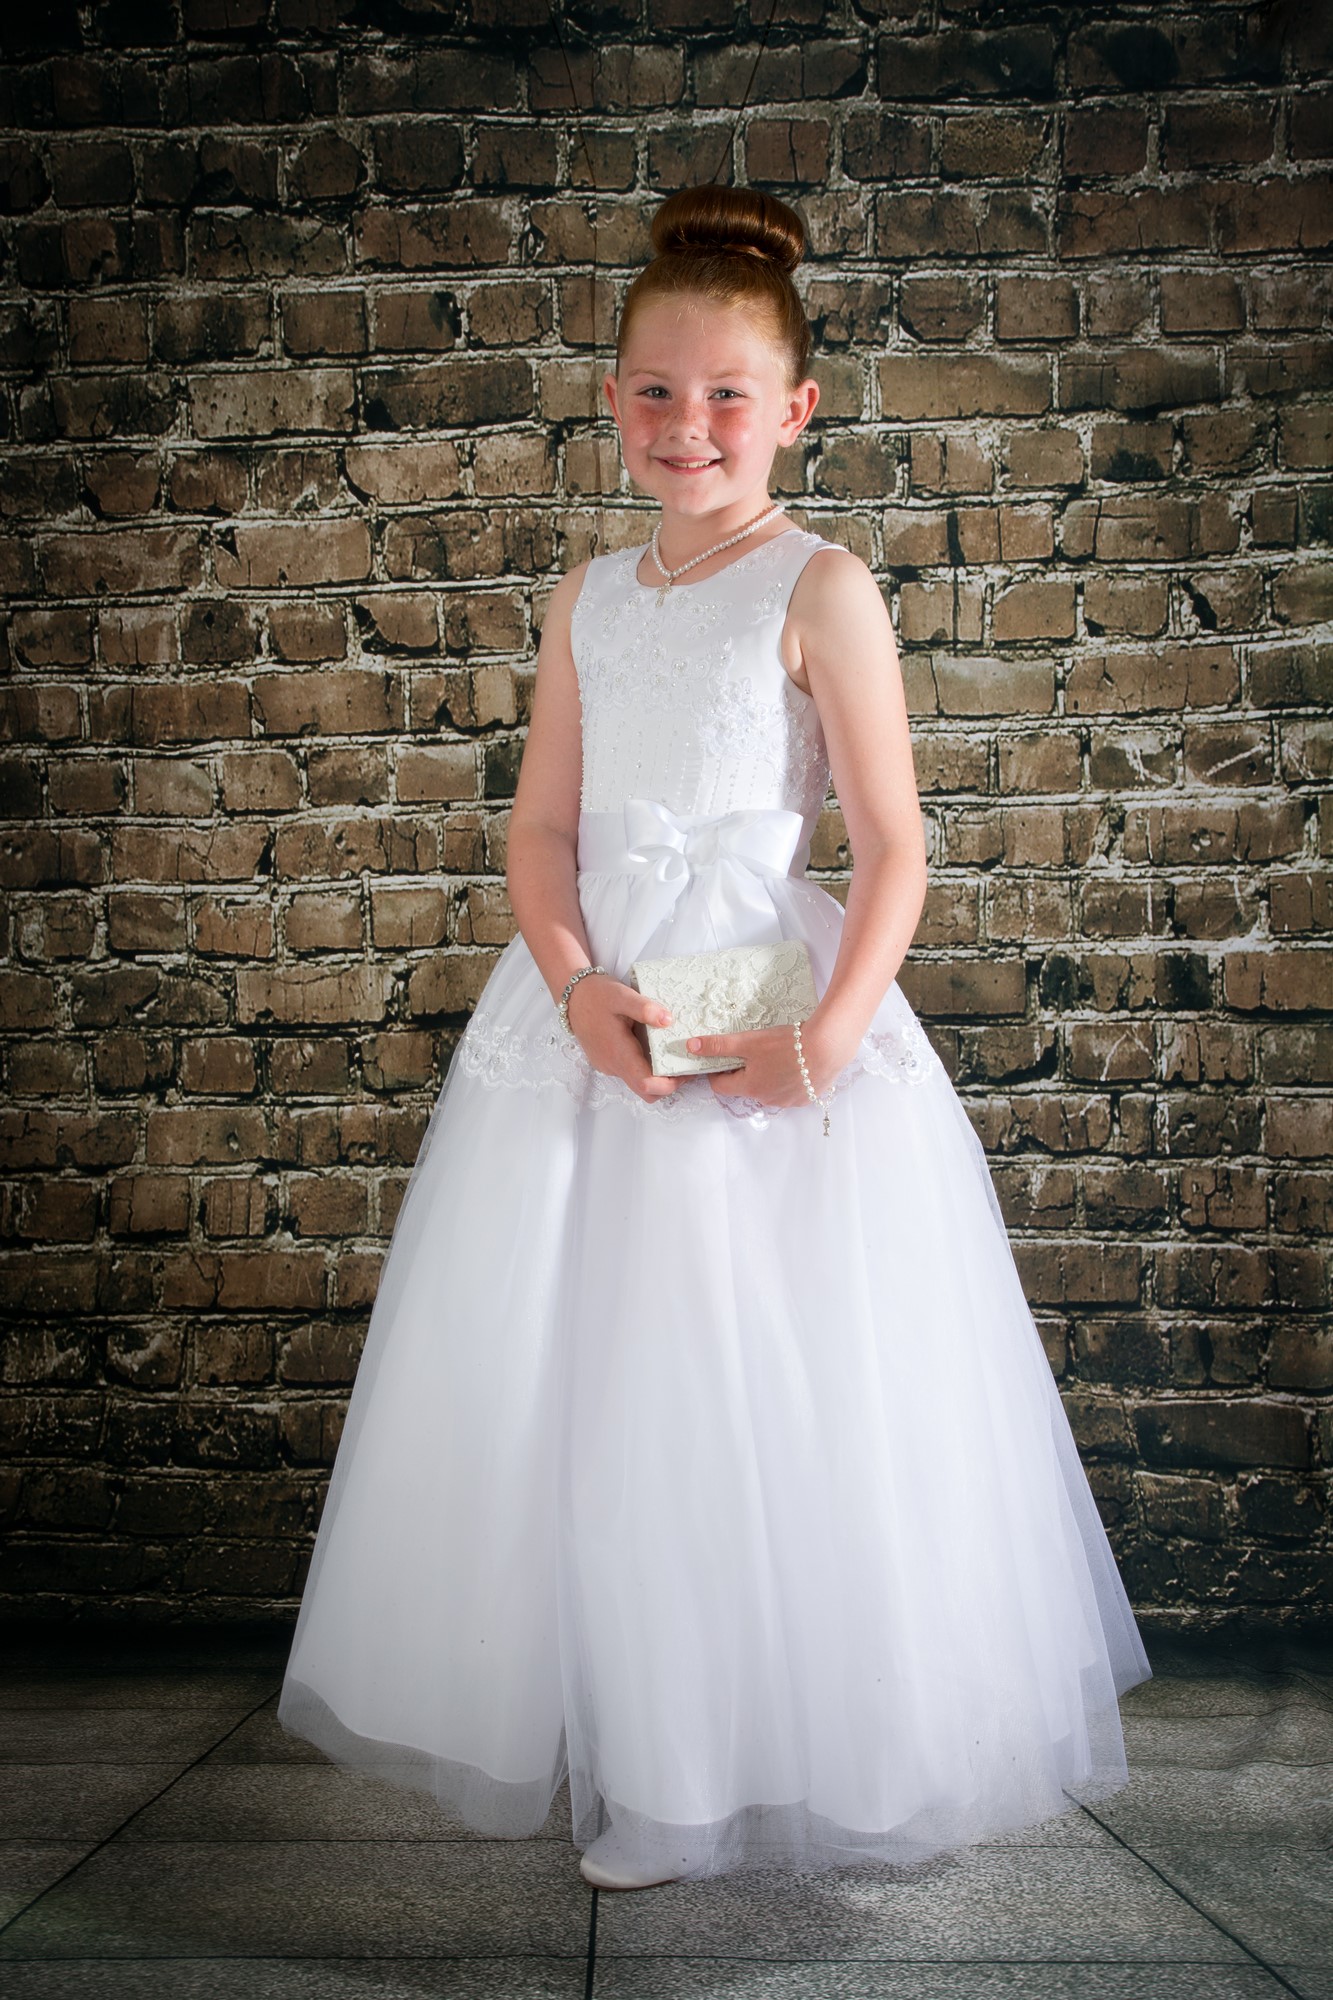 Communion Photos, First Communion Cookstown, 1st Communion Photography Mid Ulster